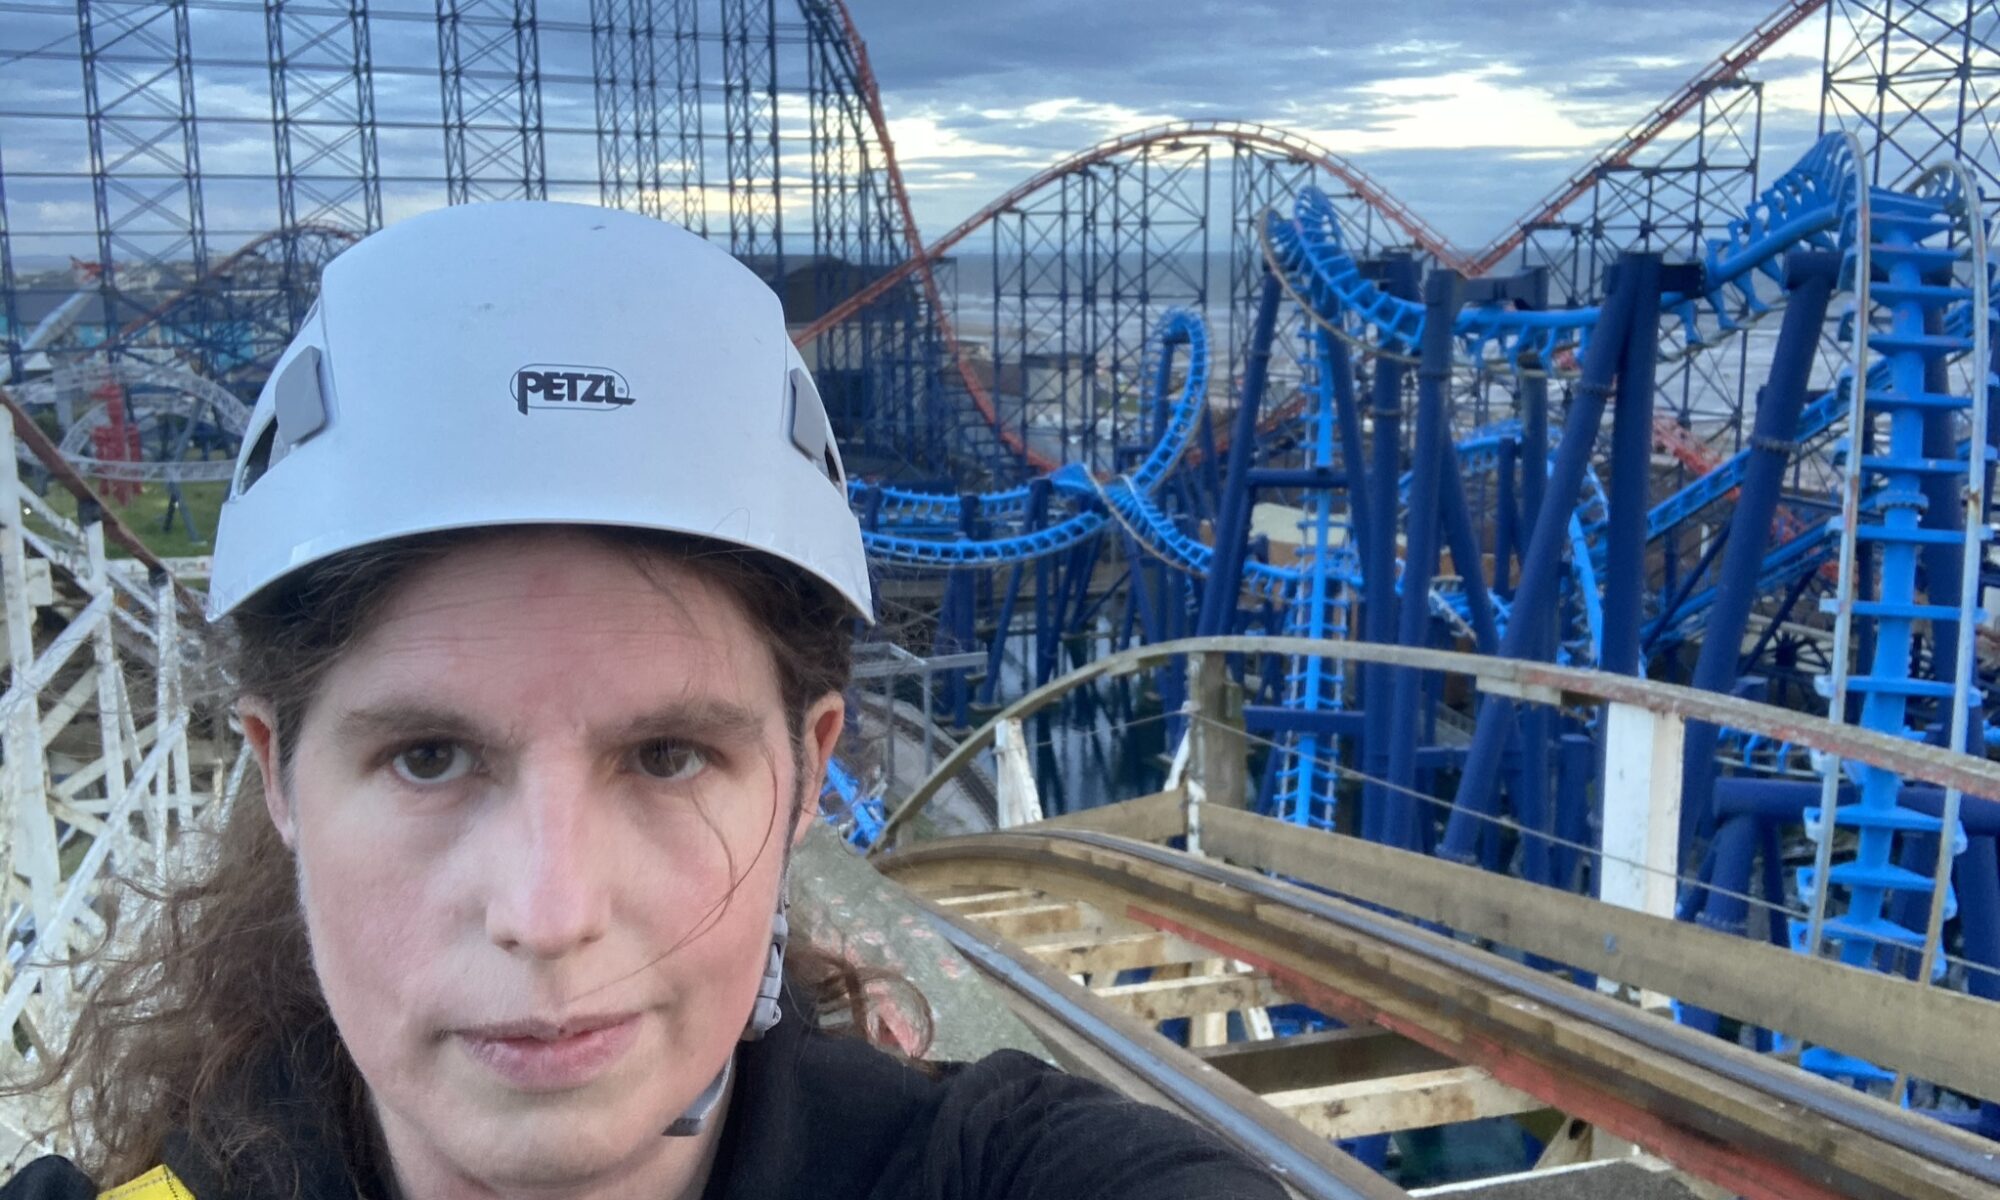 Photo of Katy wearing safety hat and harness, standing on top of the Big Dipper rollercoaster in Blackpool with view of Big One, Infusion and Big Dipper in background